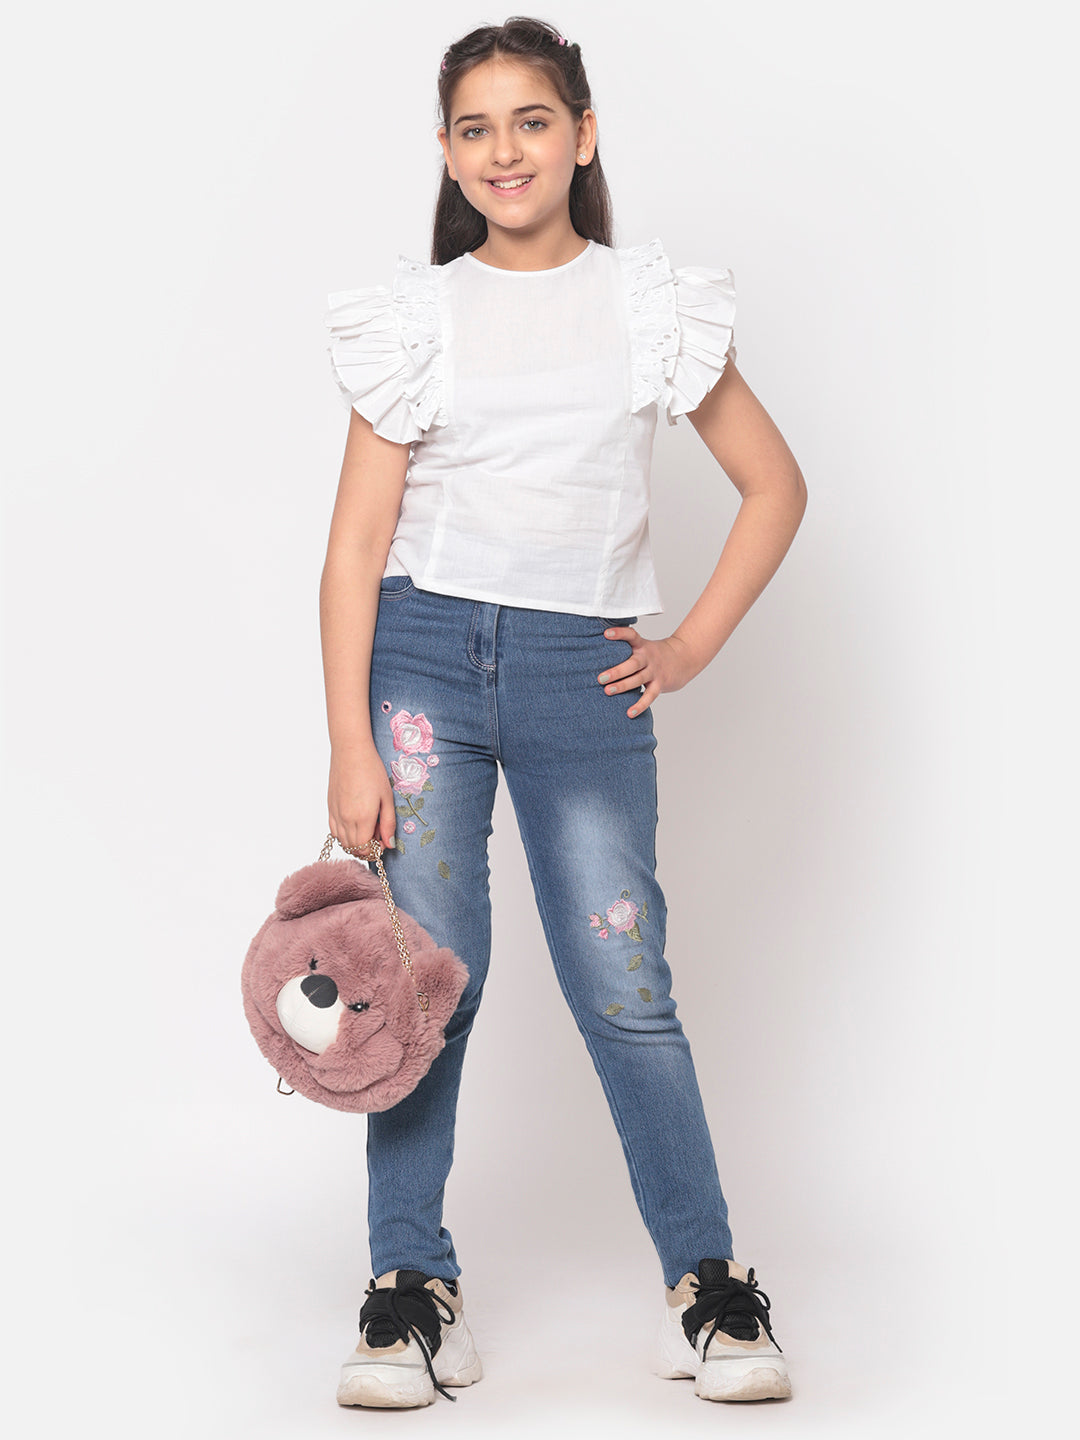 MINOS Solid White Frill Top